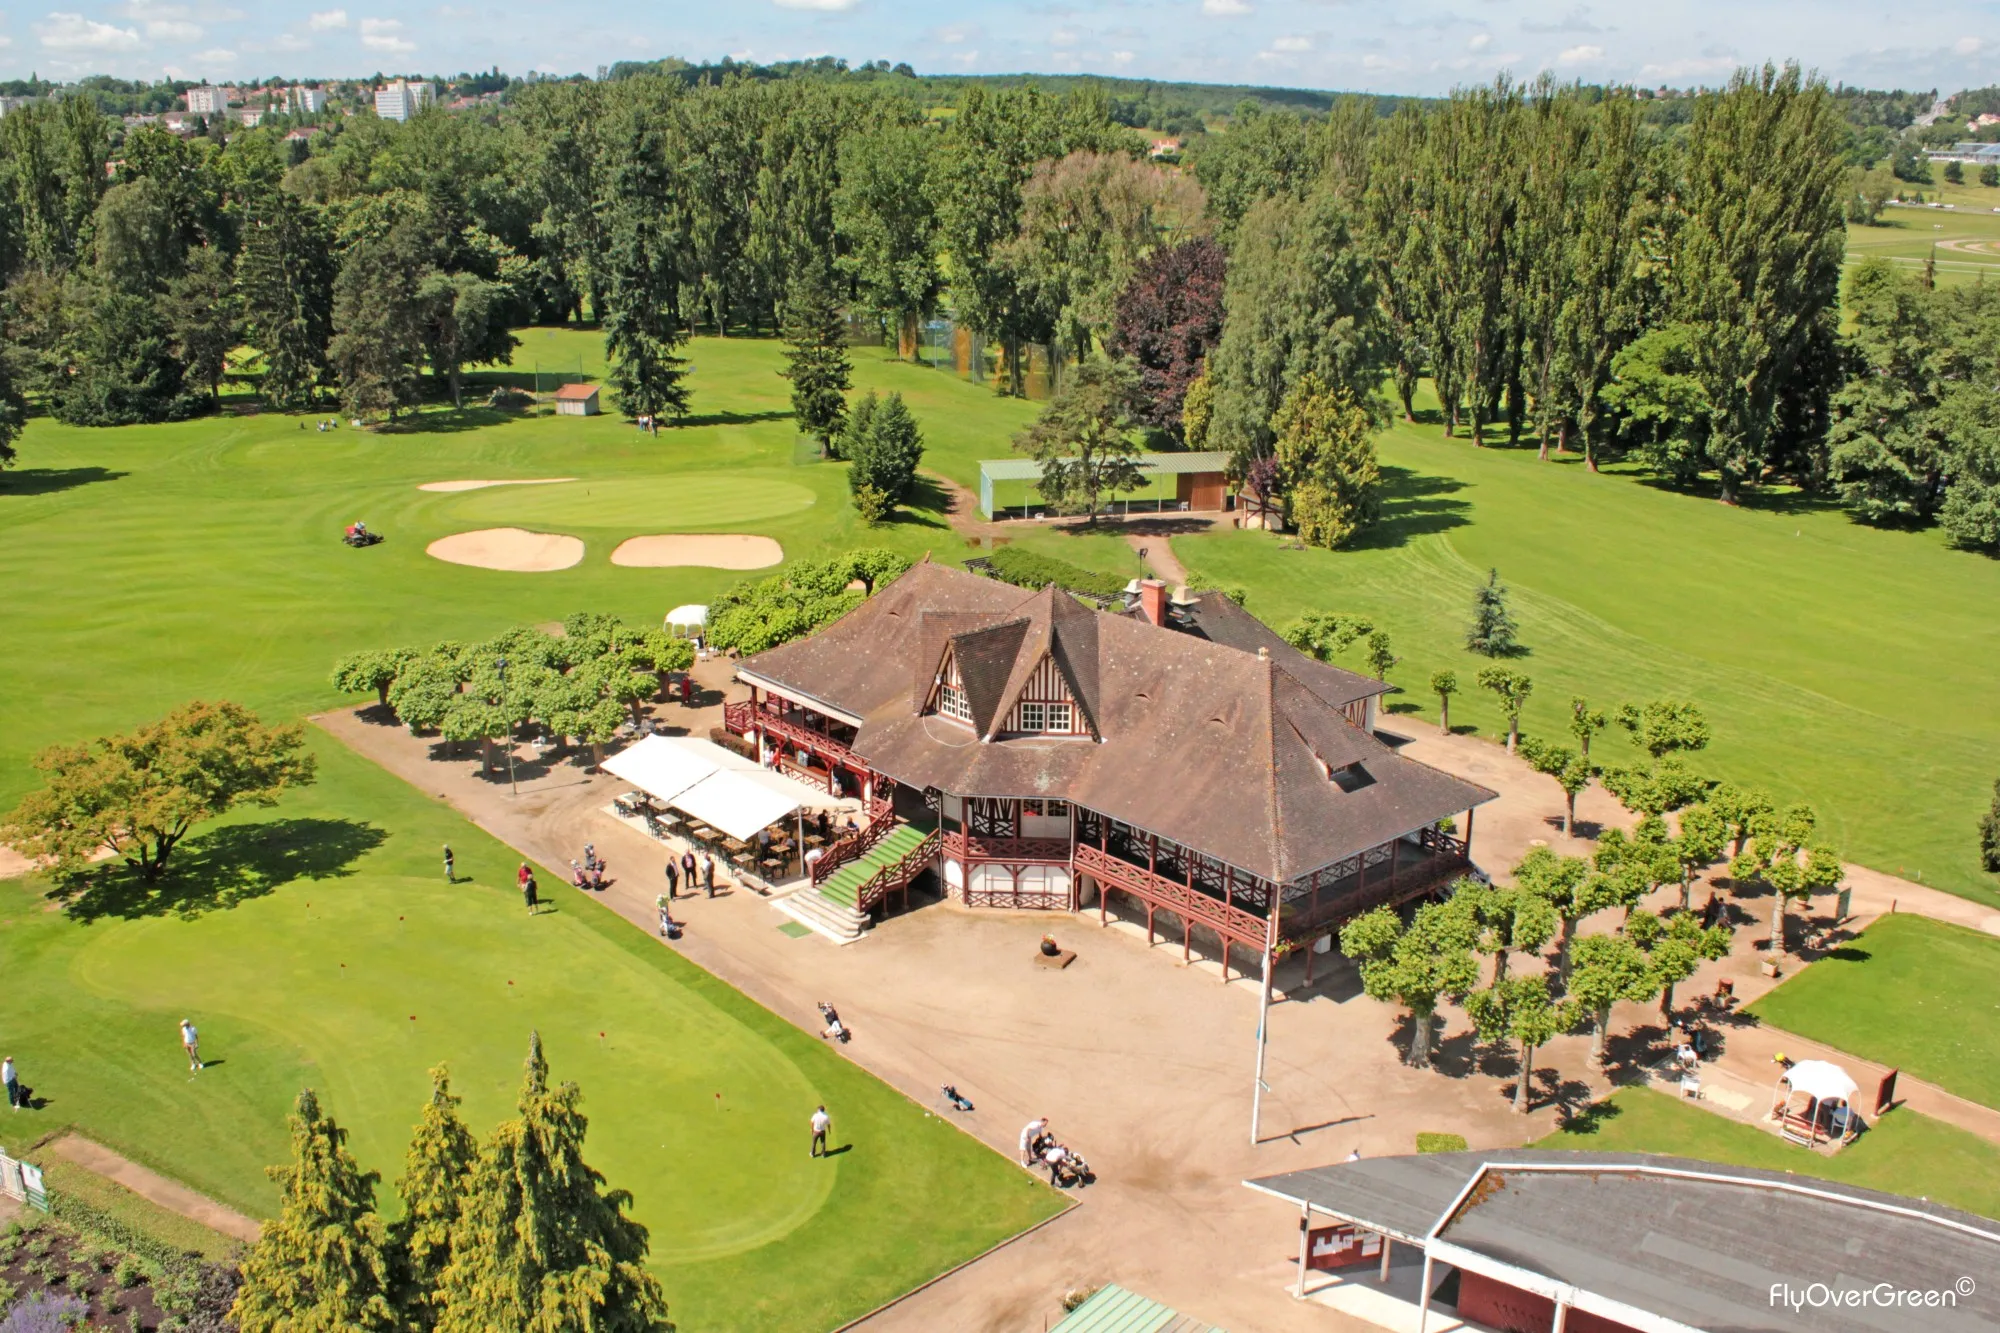 Golf Sporting Club de Vichy in France, Europe | Golf - Rated 3.6